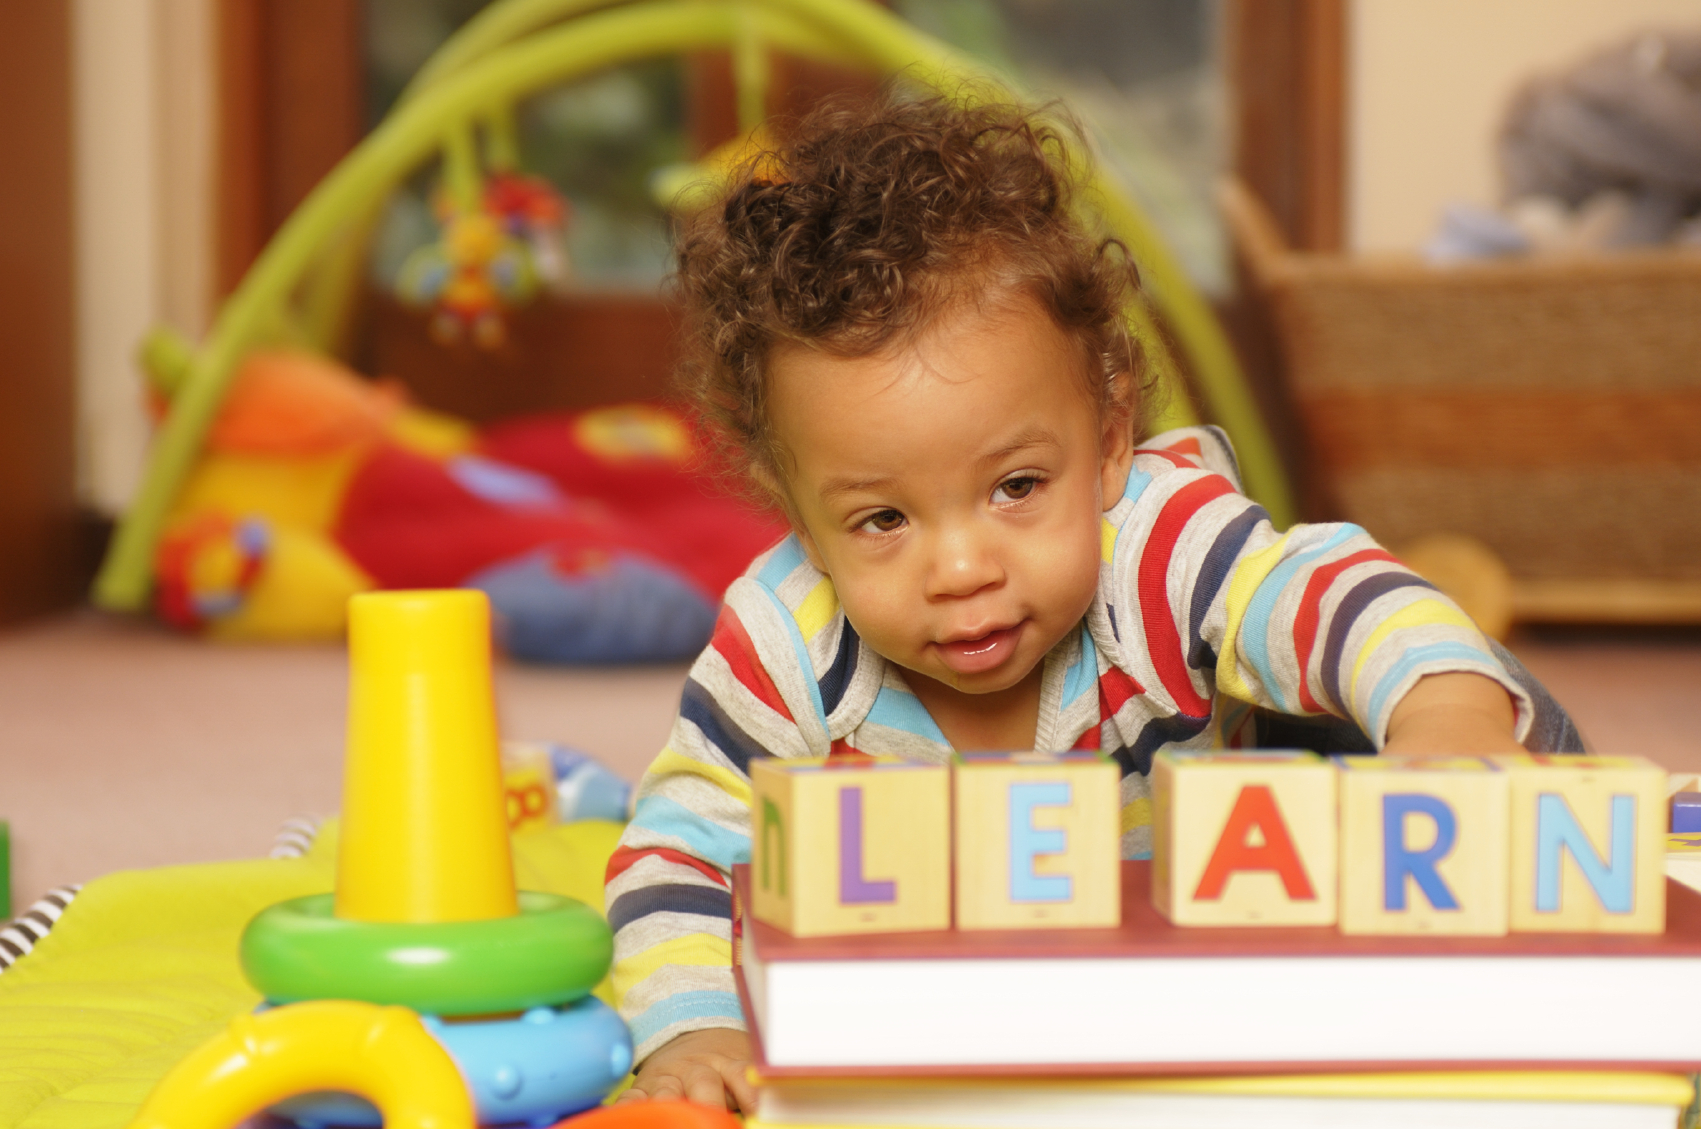 Principles of Child Development and Learning Child Care Training Course